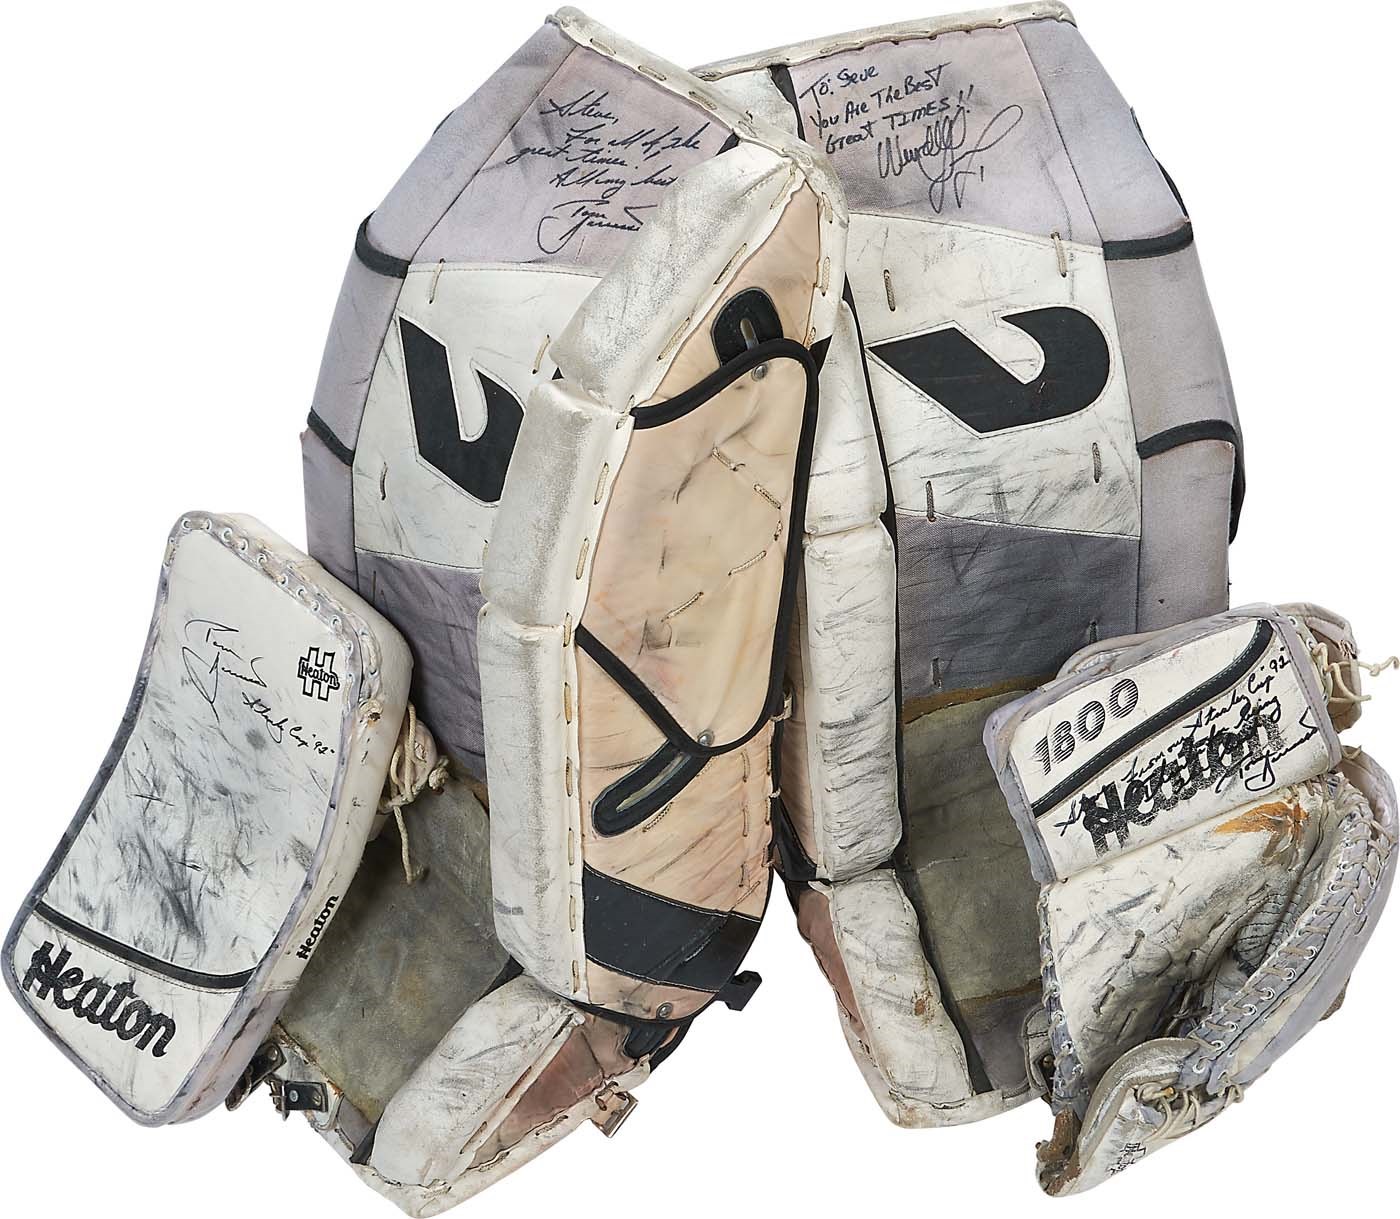 1992 Tom Barrasso Stanley Cup Finals Game Worn Catcher, Blocker and Leg Pads (Photo-Matched)